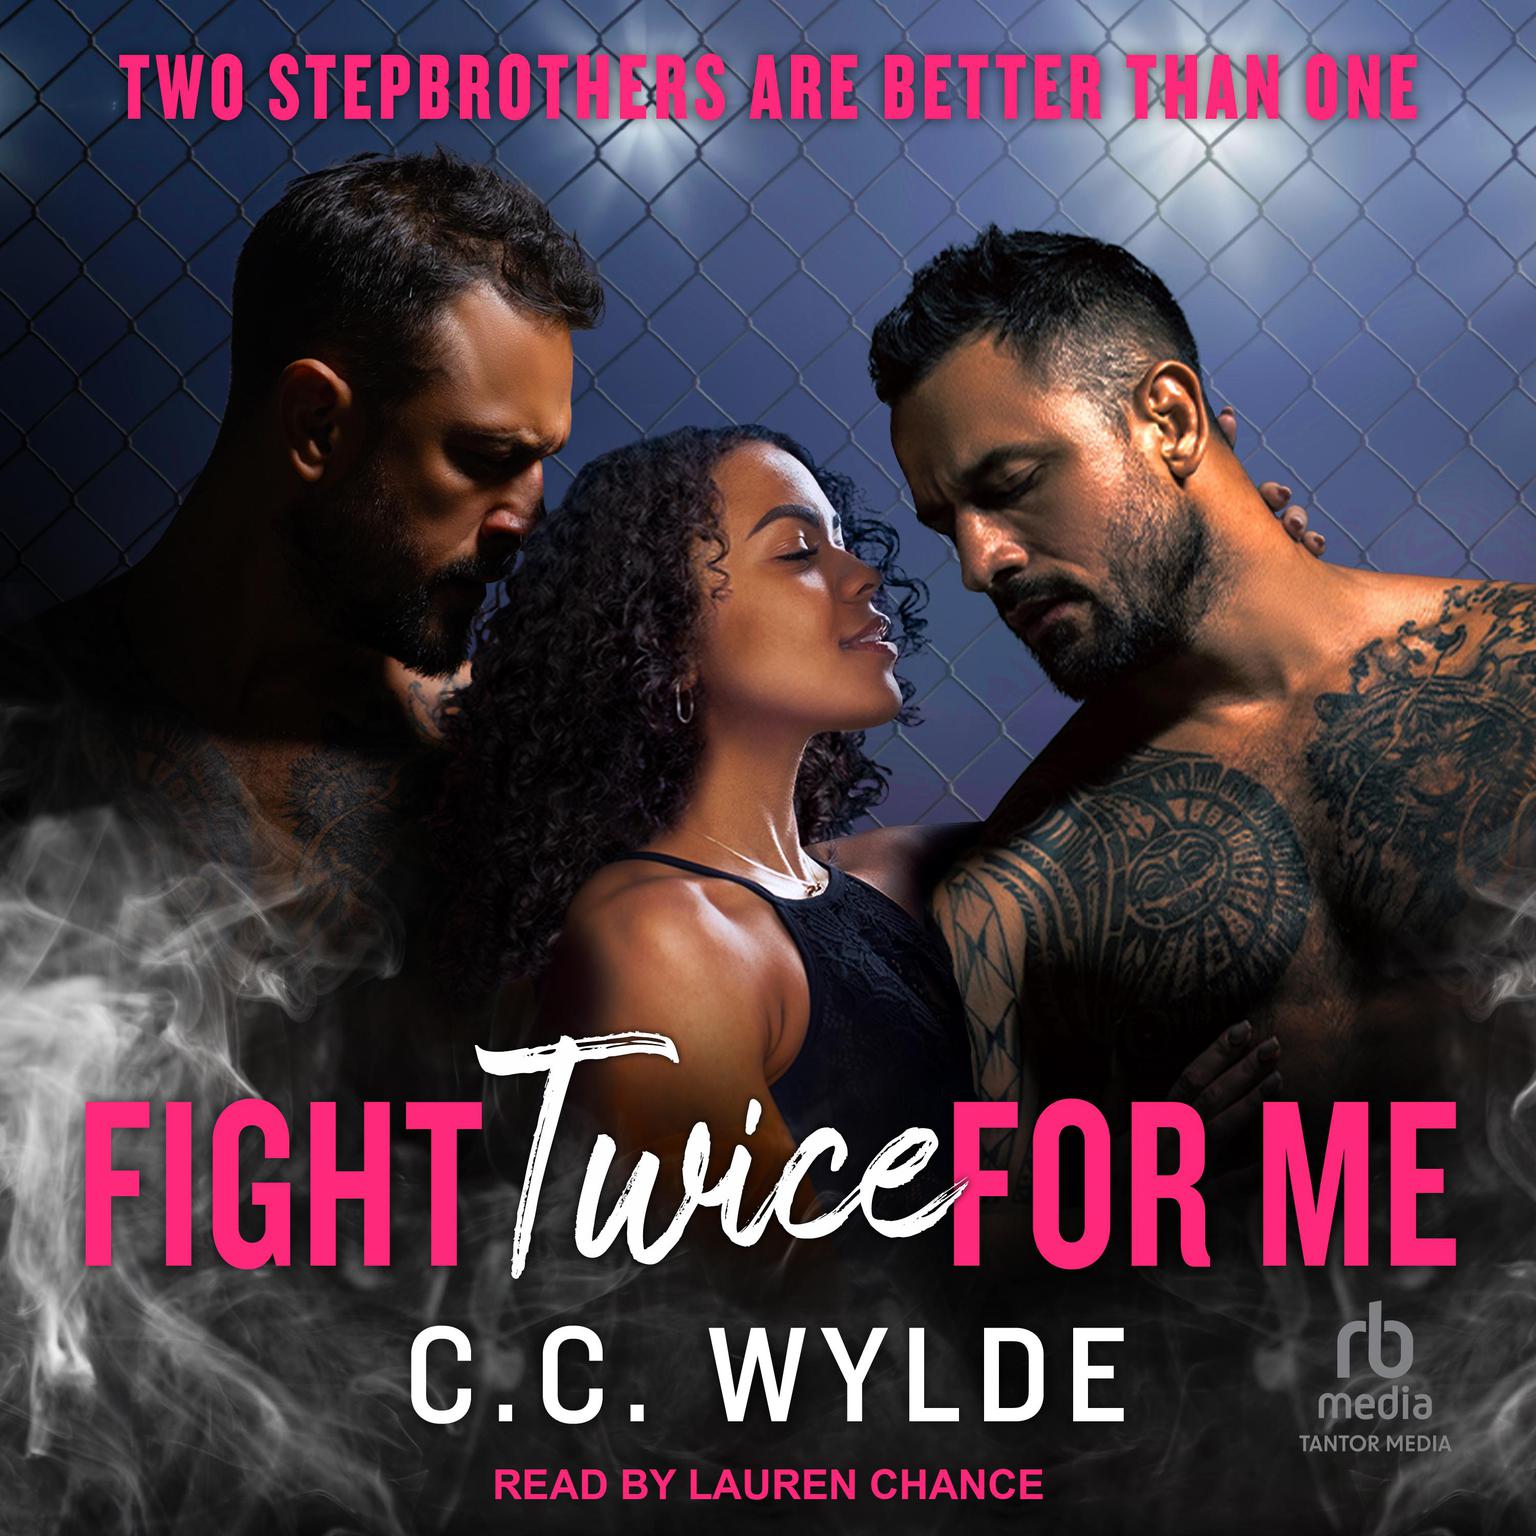 Fight Twice for Me: (Two Stepbrothers Are Better Than One) Audiobook, by C.C. Wylde